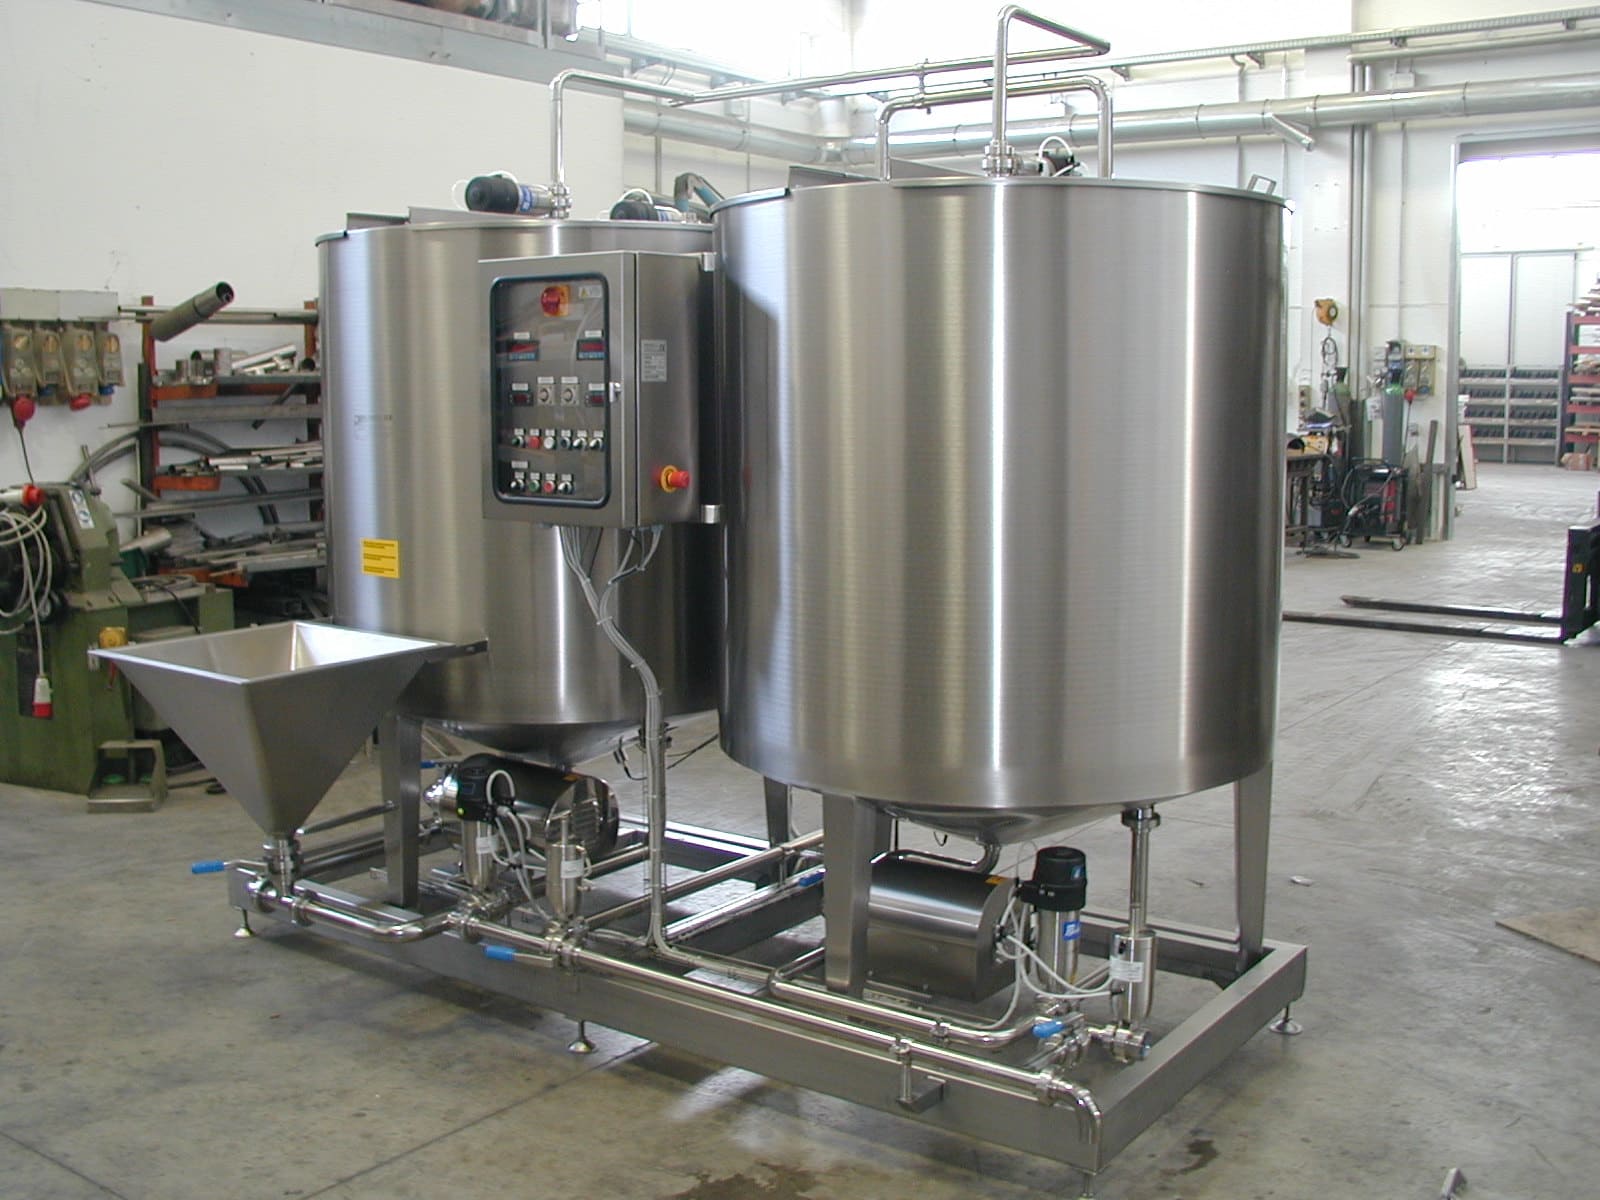 CASE STUDY – PICKLE MANUFACTURING PLANT